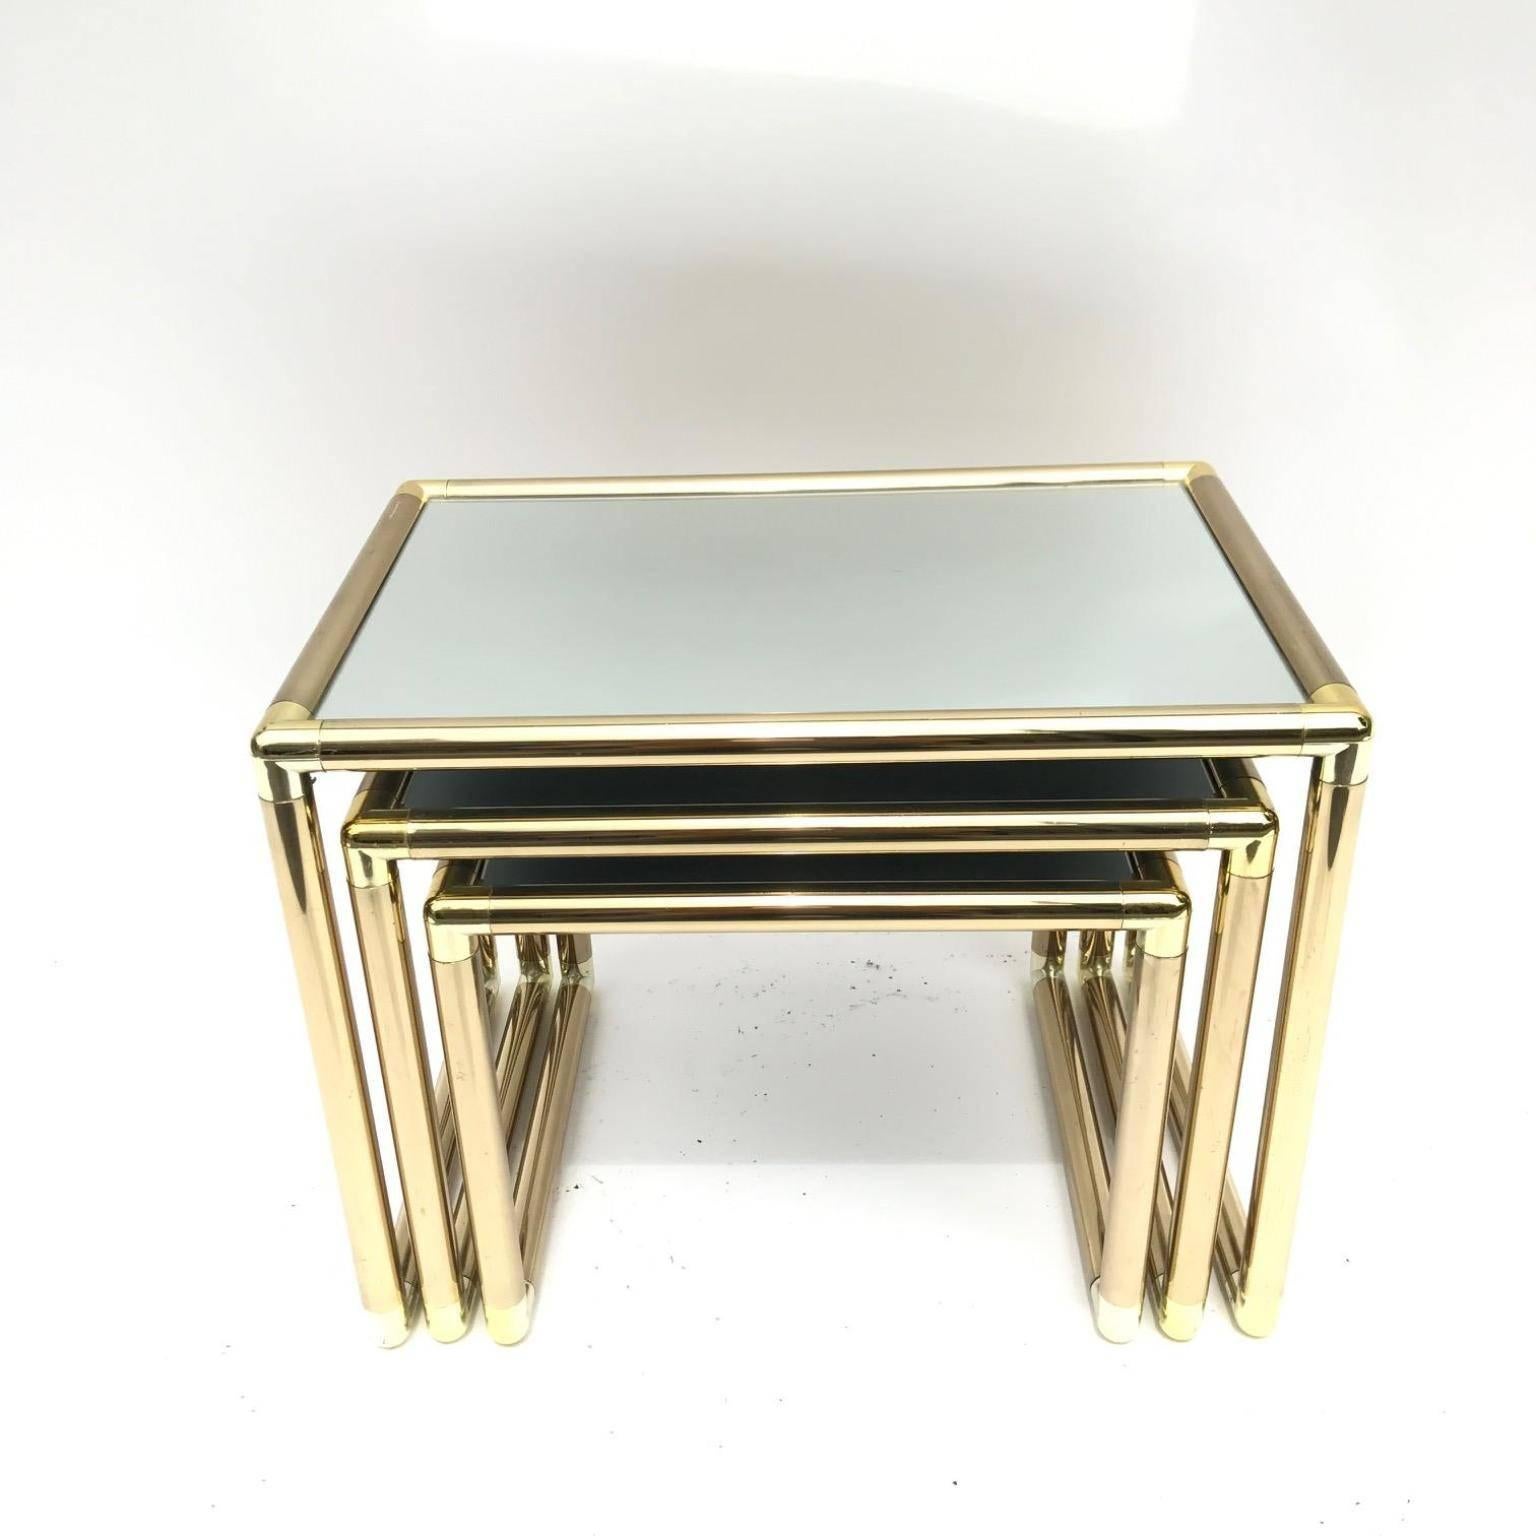 Beautiful finish copper and brass corners and mirror tops nesting tables,
Italy, circa 1960s.